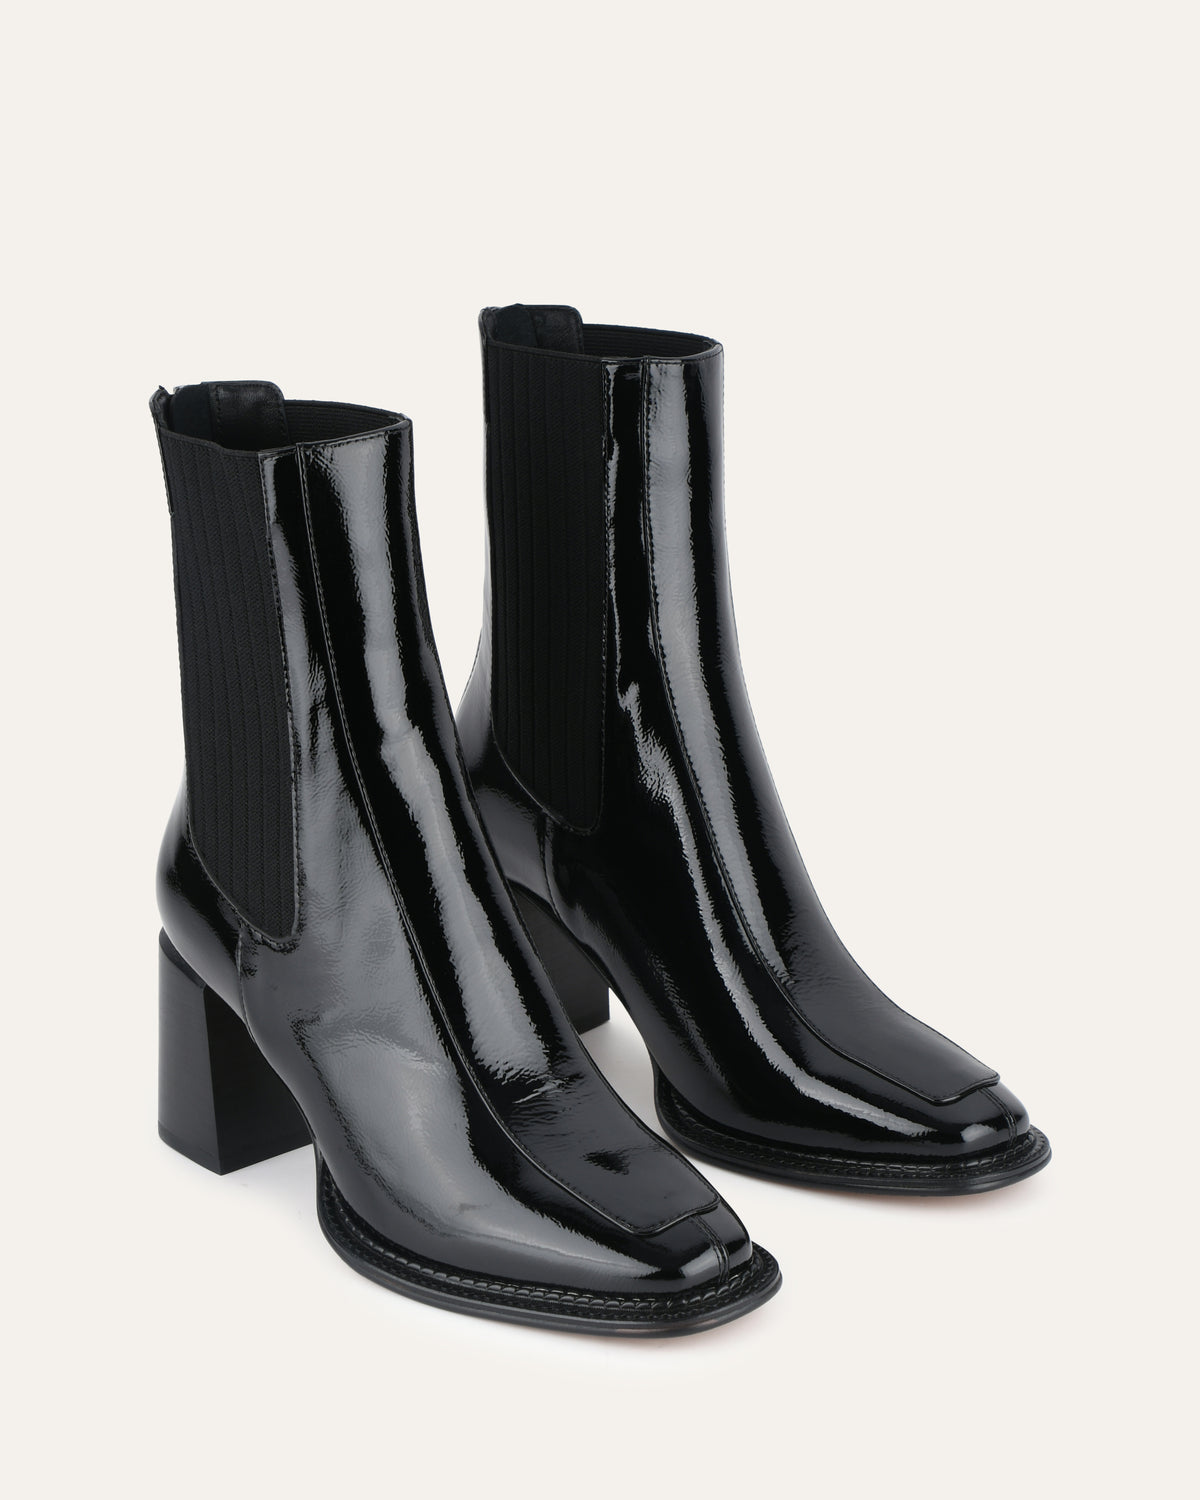 DEVINA MID ANKLE BOOTS BLACK CRINKLE PATENT